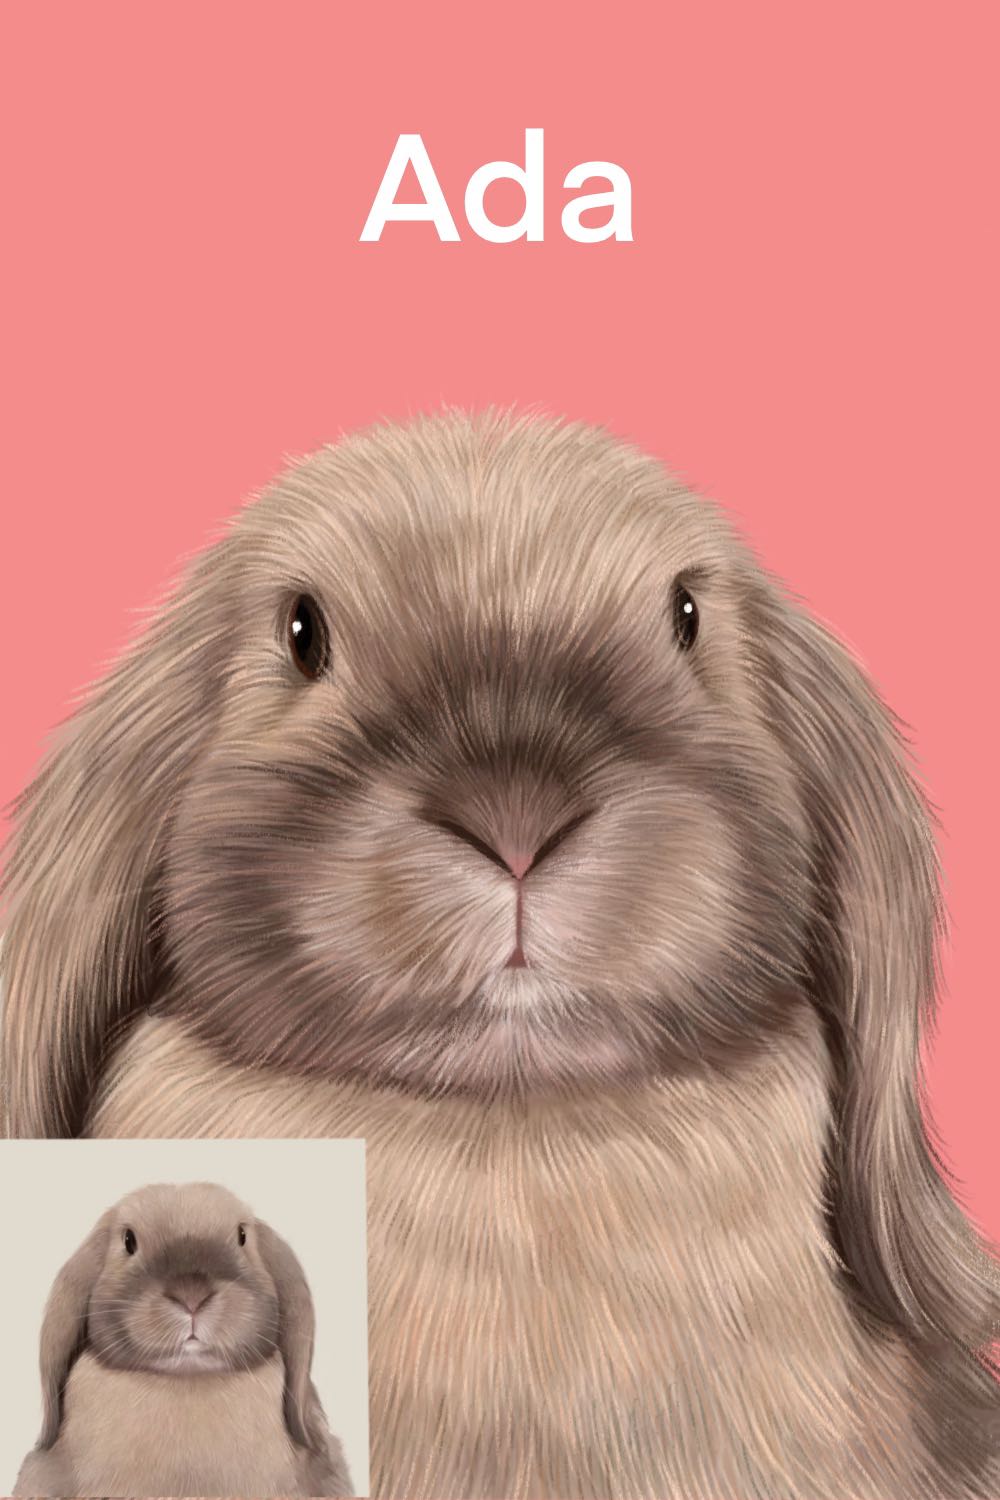 Rabbit in colored pencil painting style with pink background